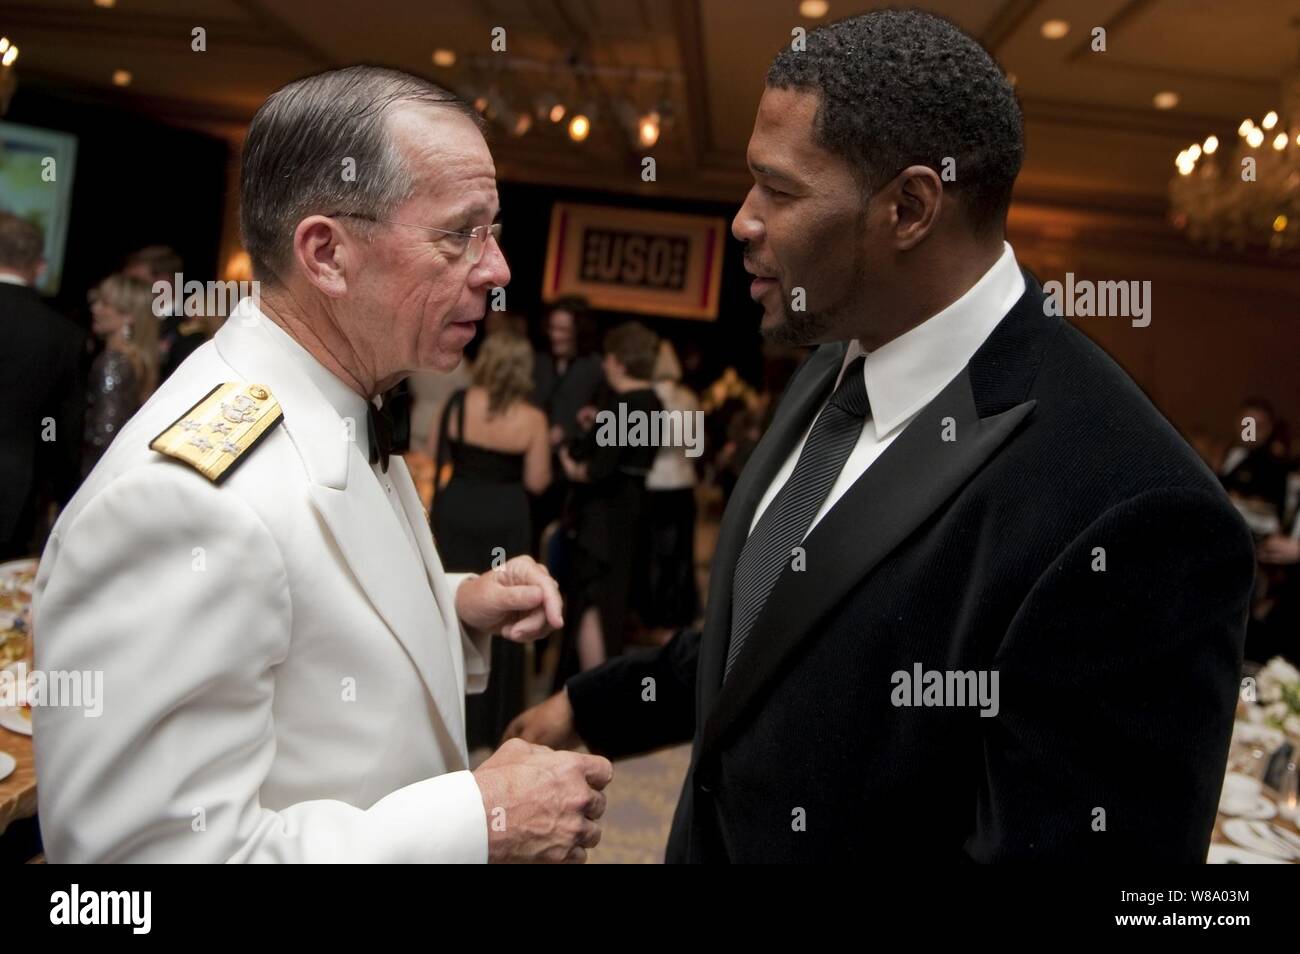 Chairman of the Joint Chiefs of Staff Adm. Mike Mullen, U.S. Navy, speaks with New York Giant defensive end Michael Strahan at the 2011 USO Metro Awards Dinner at the Ritz-Carlton Hotel in Pentagon City, Va., on April 12, 2011. Stock Photo